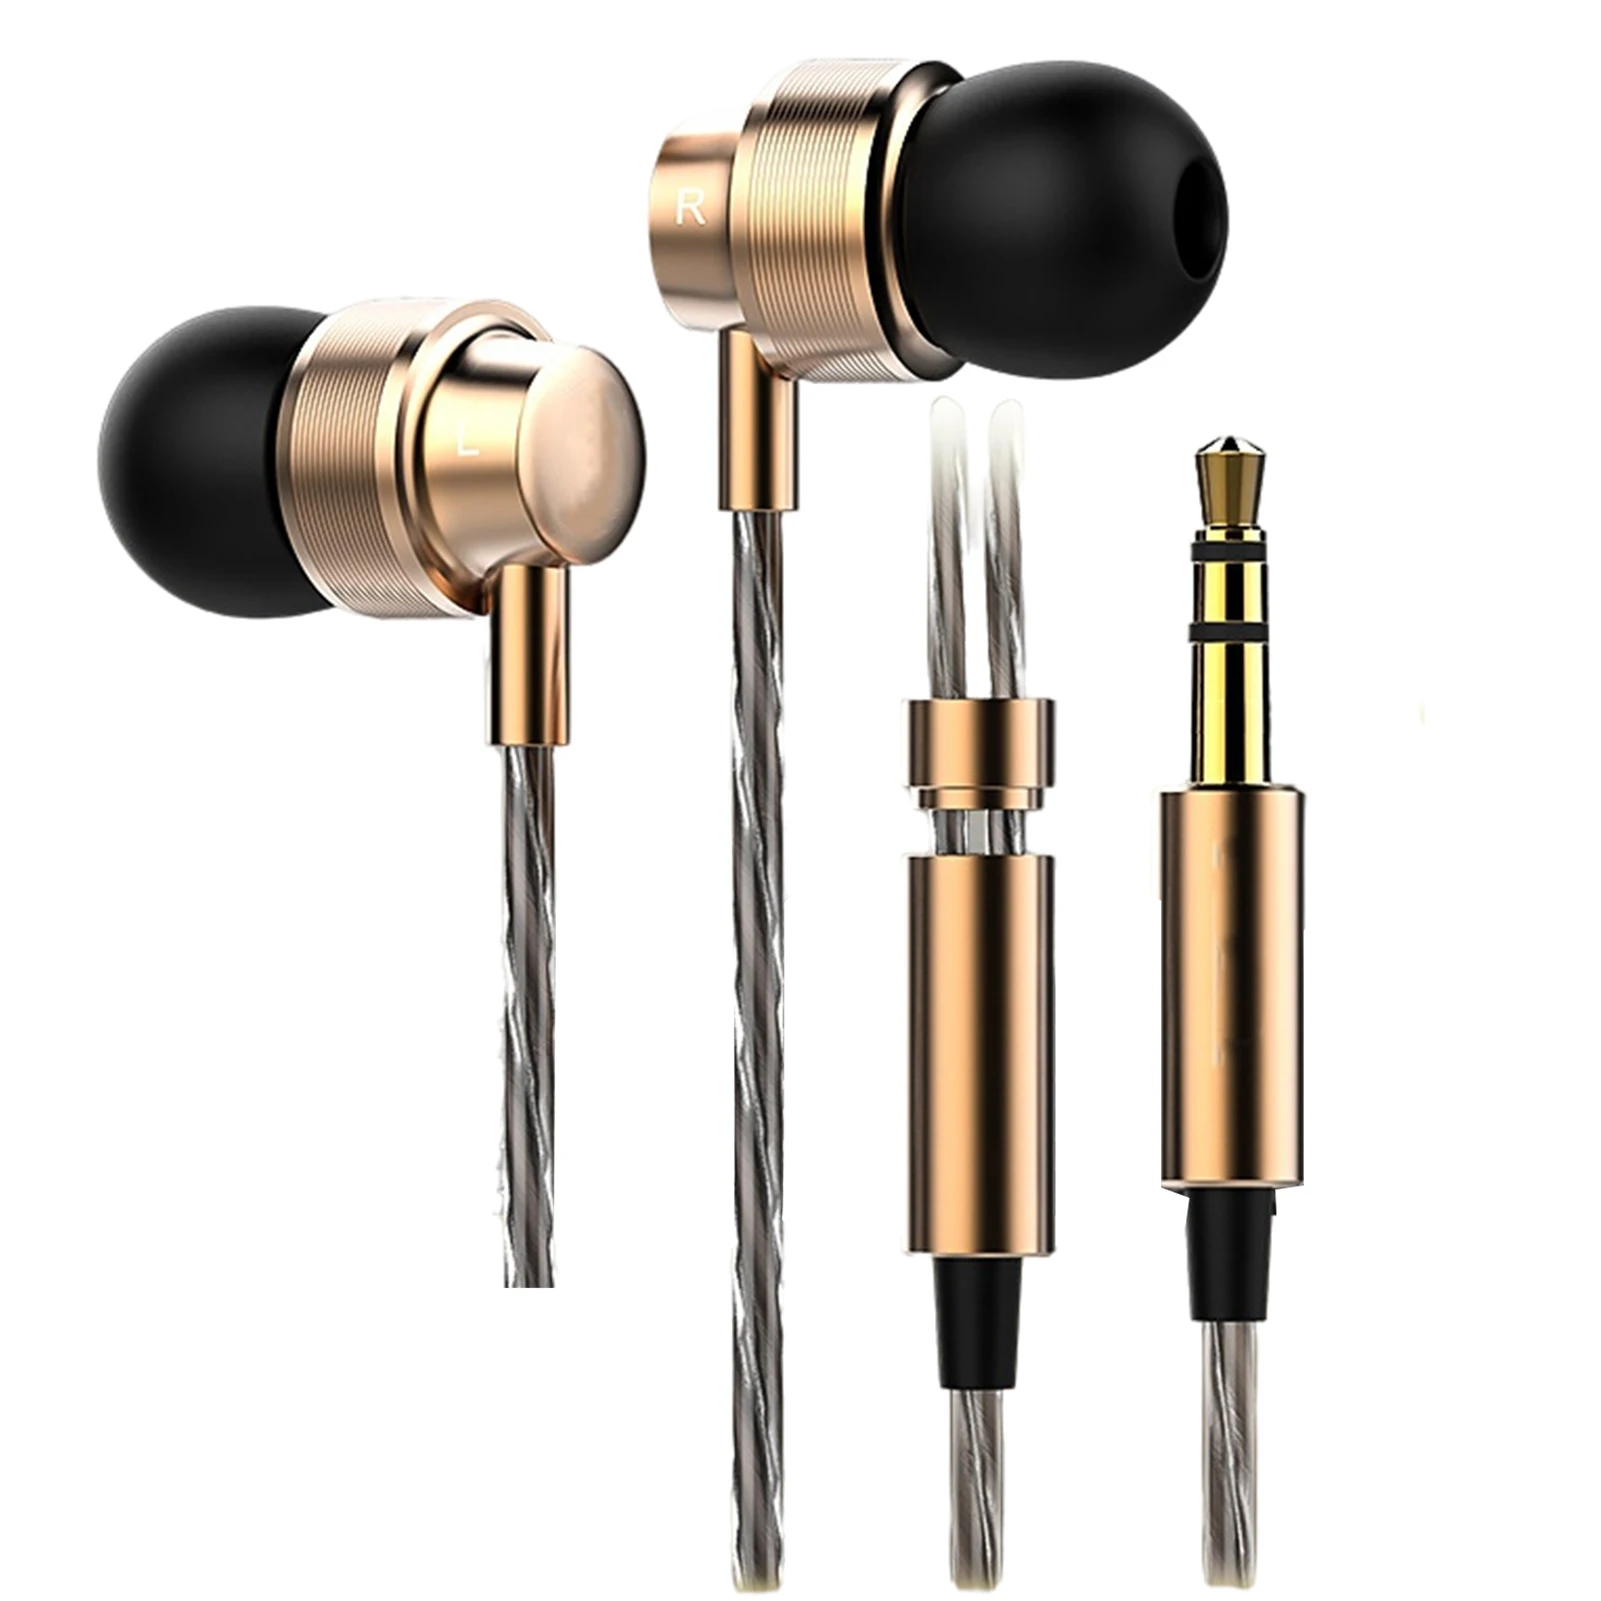 

Wired Earphones Earbuds Headphones 3.5mm In Ear Earphone Earpiece With Mic Stereo Headset For Samsung S6 Xiaomi Phone Computer